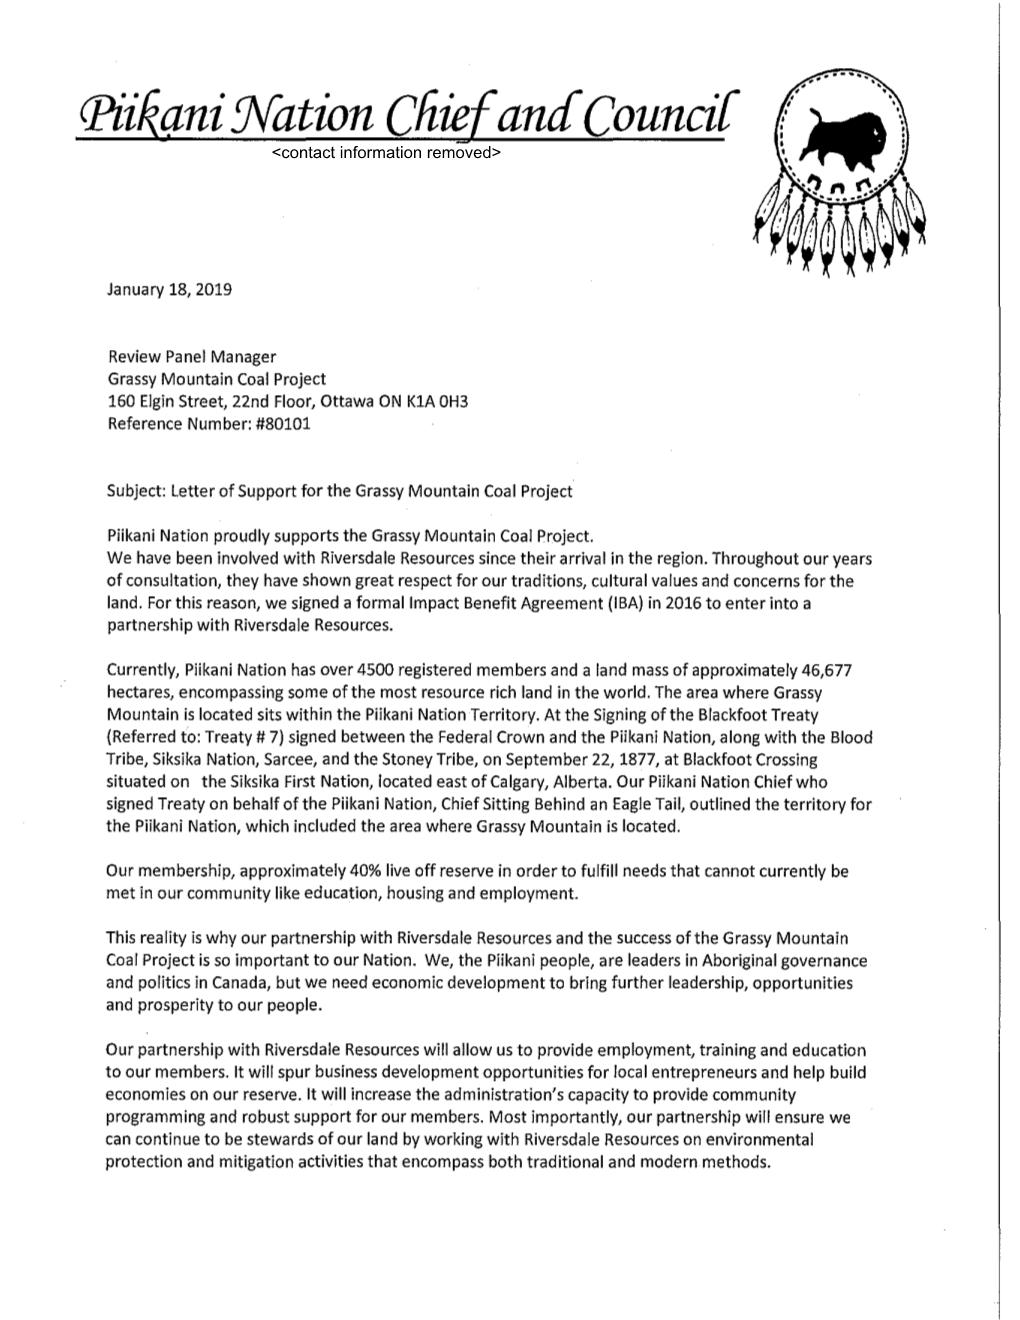 Piikani Nation Proudly Supports the Grassy Mountain Coal Project